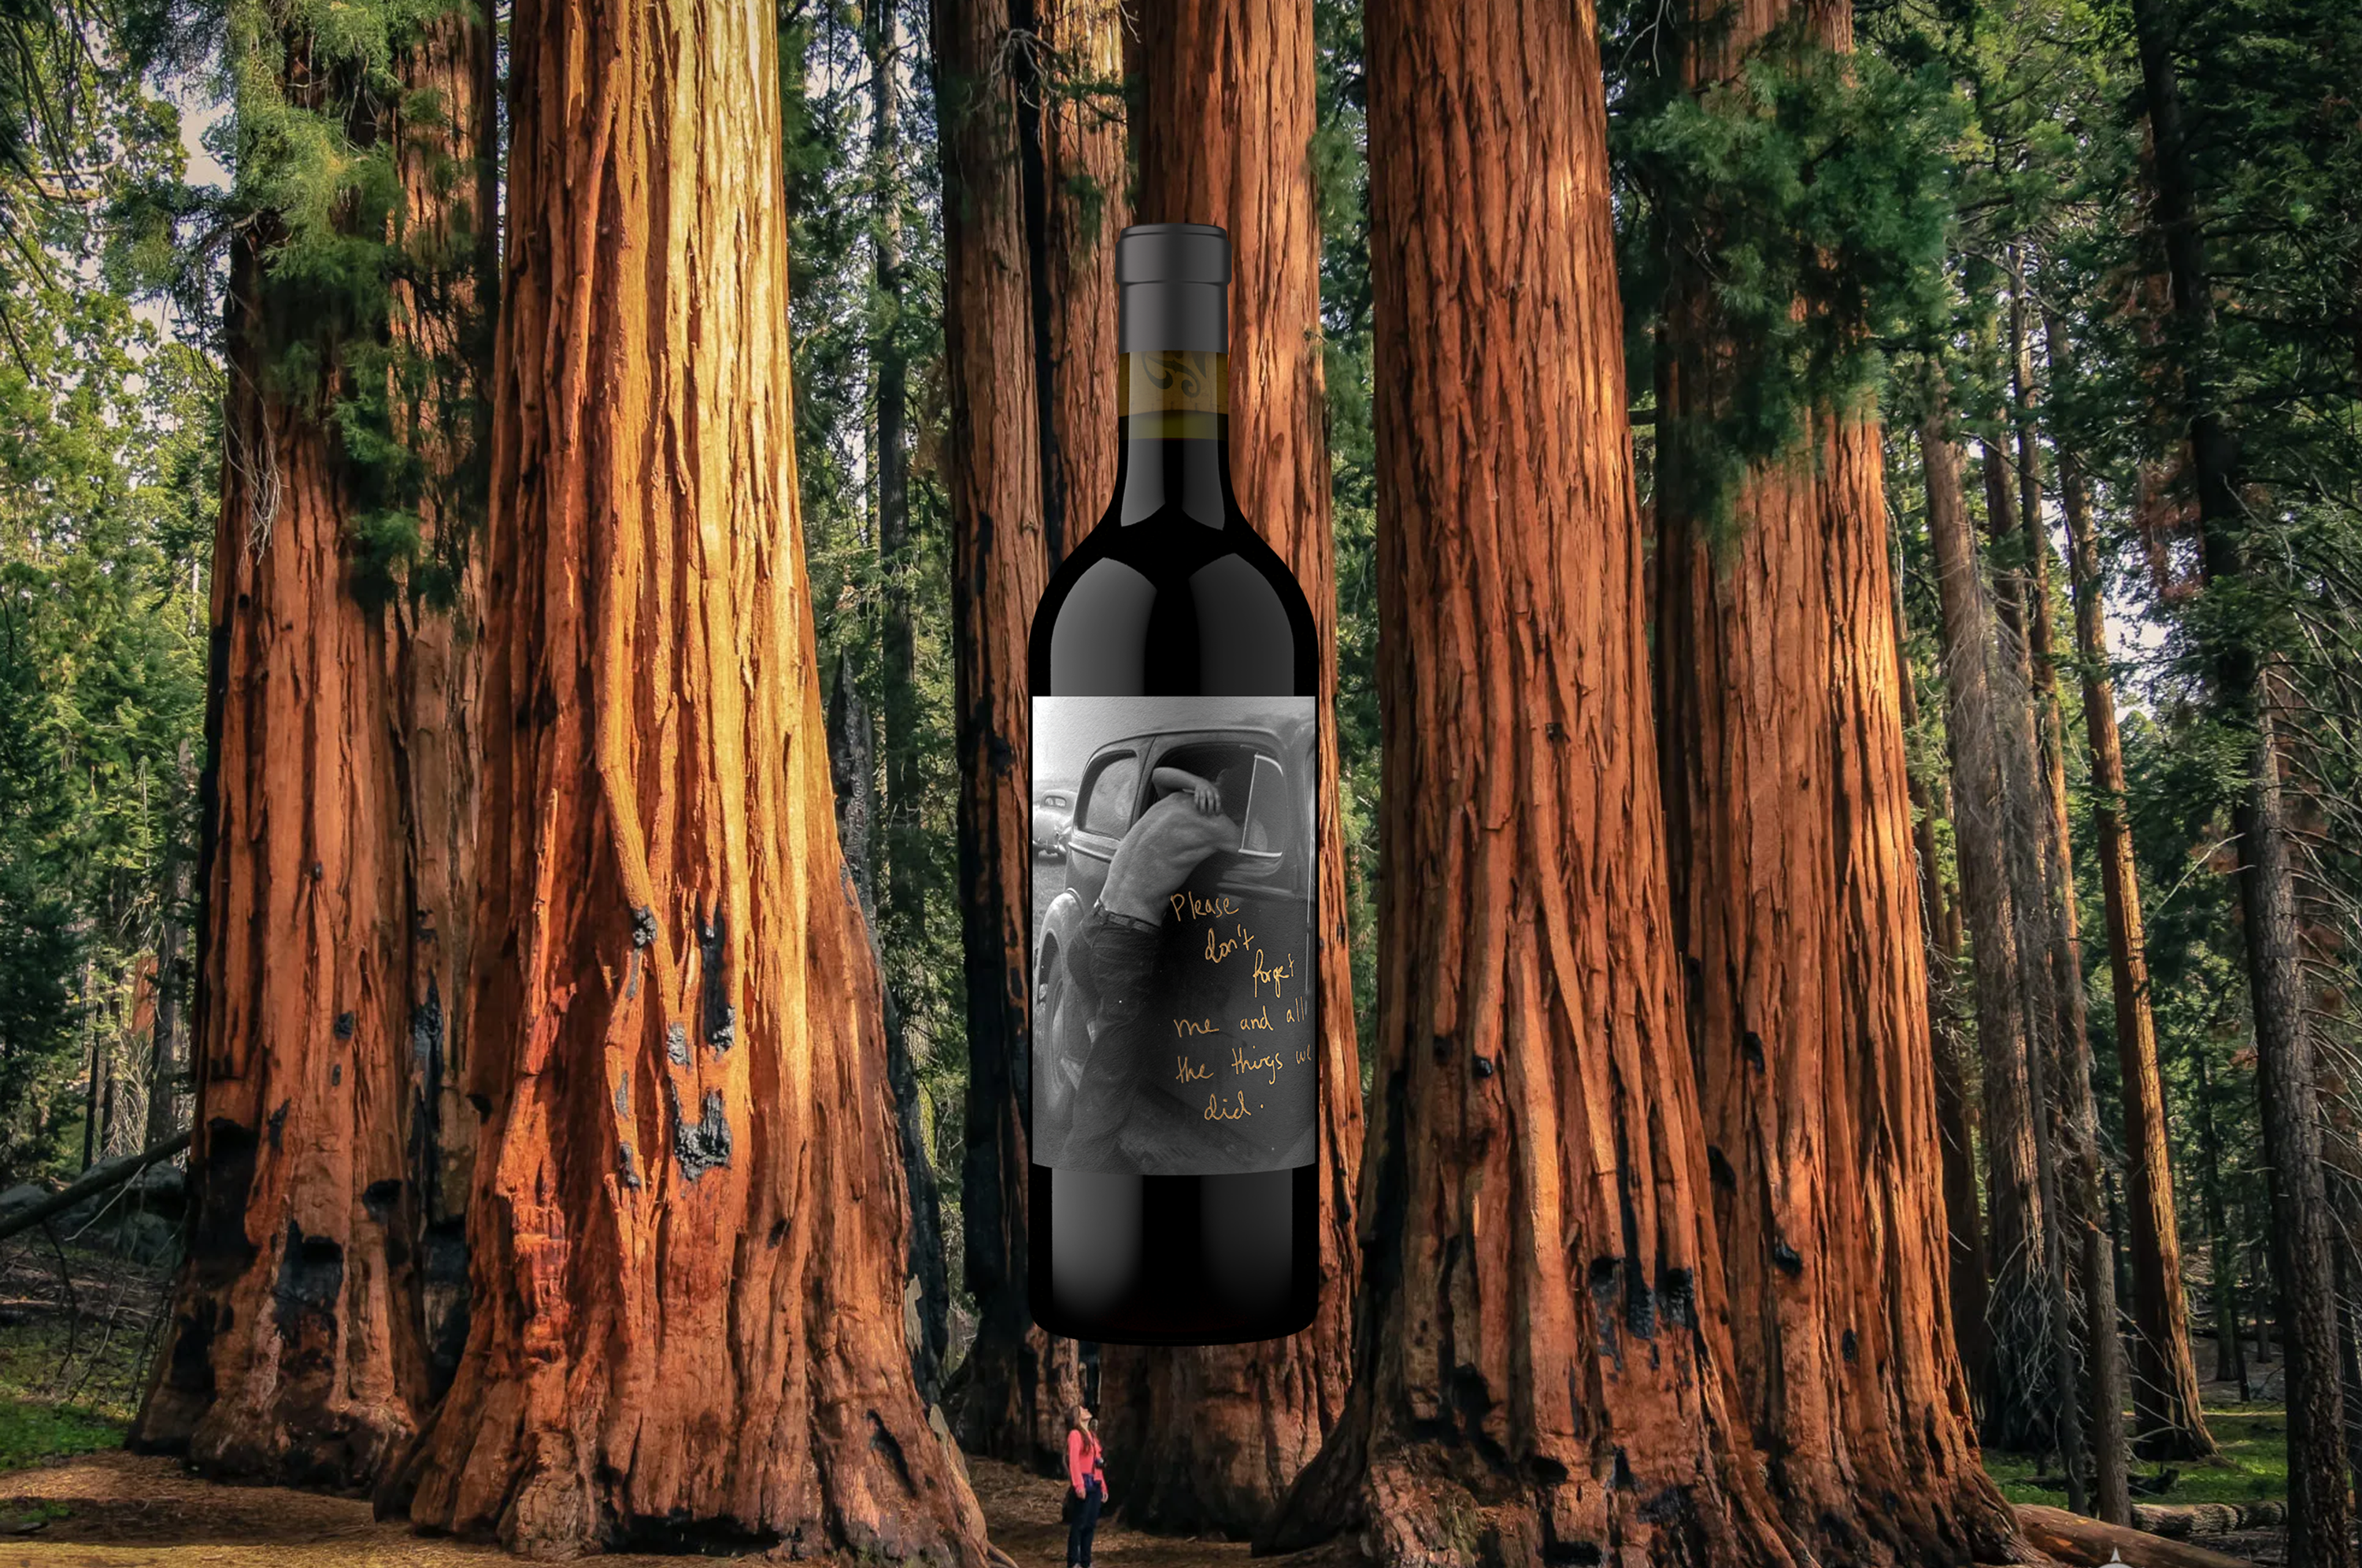 Bottle of Don't Forget Me in front of Sequoia National Park